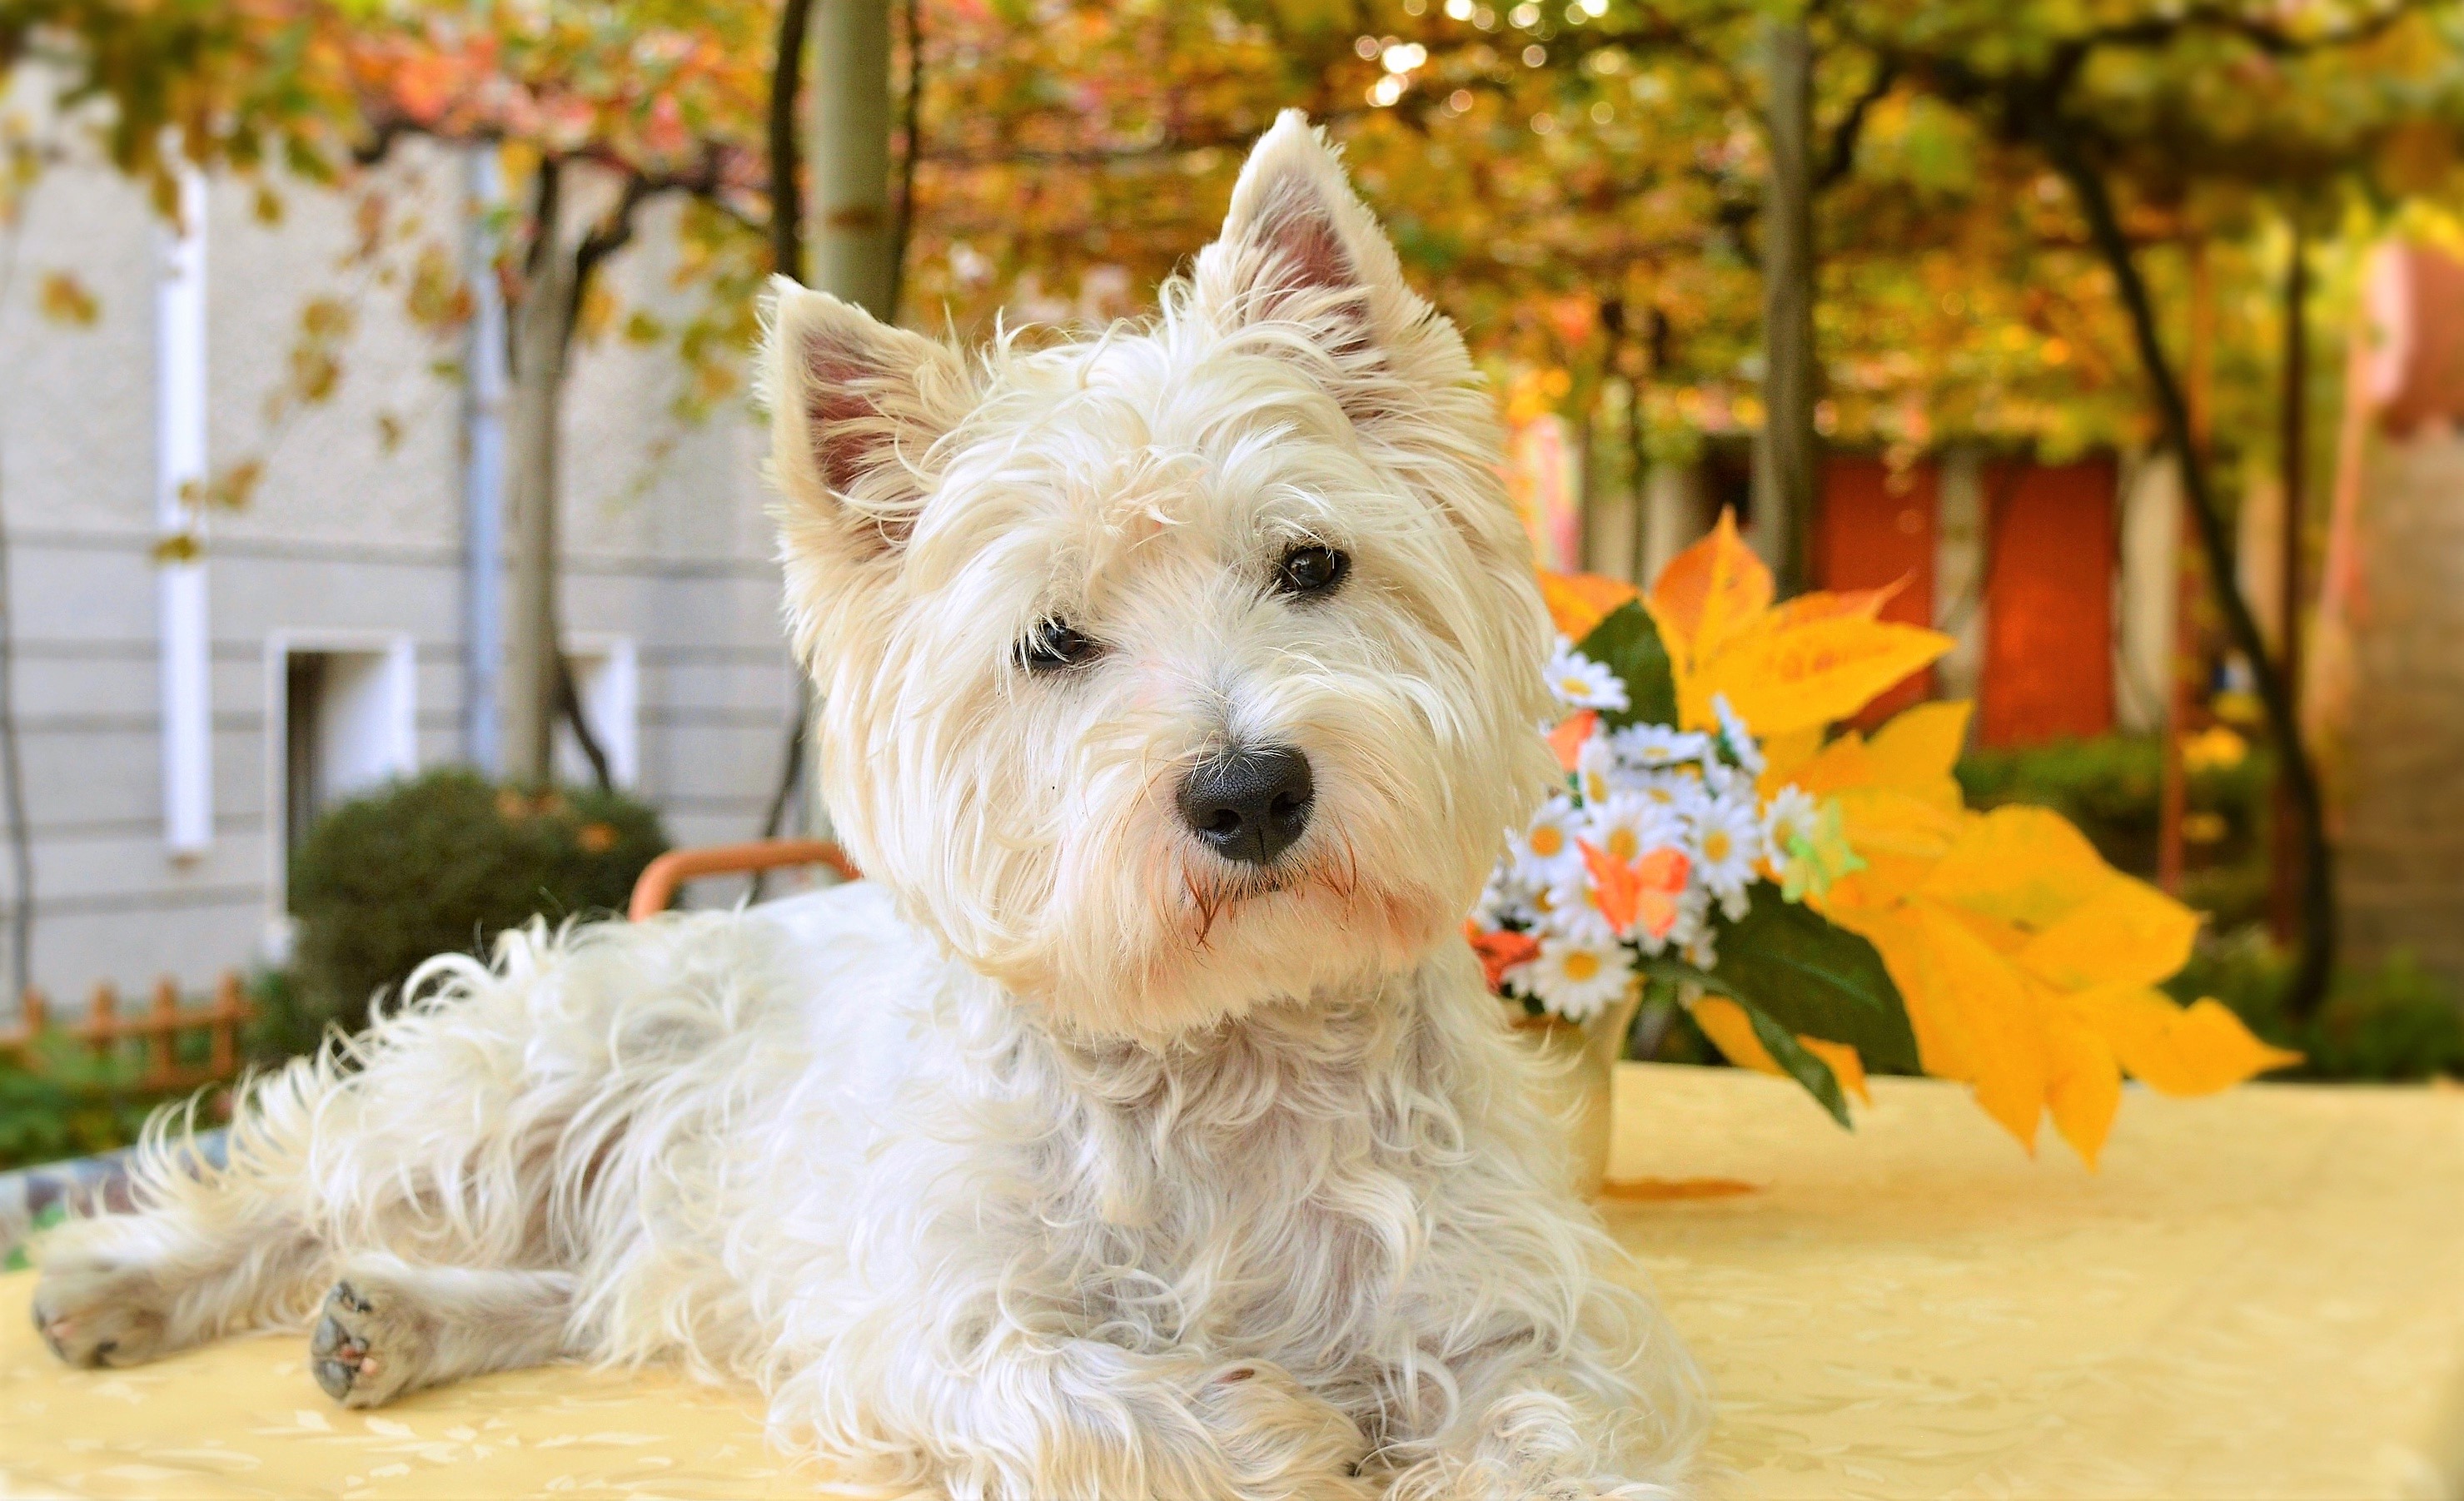 West Highland White Terrier HD Wallpaper Background Image